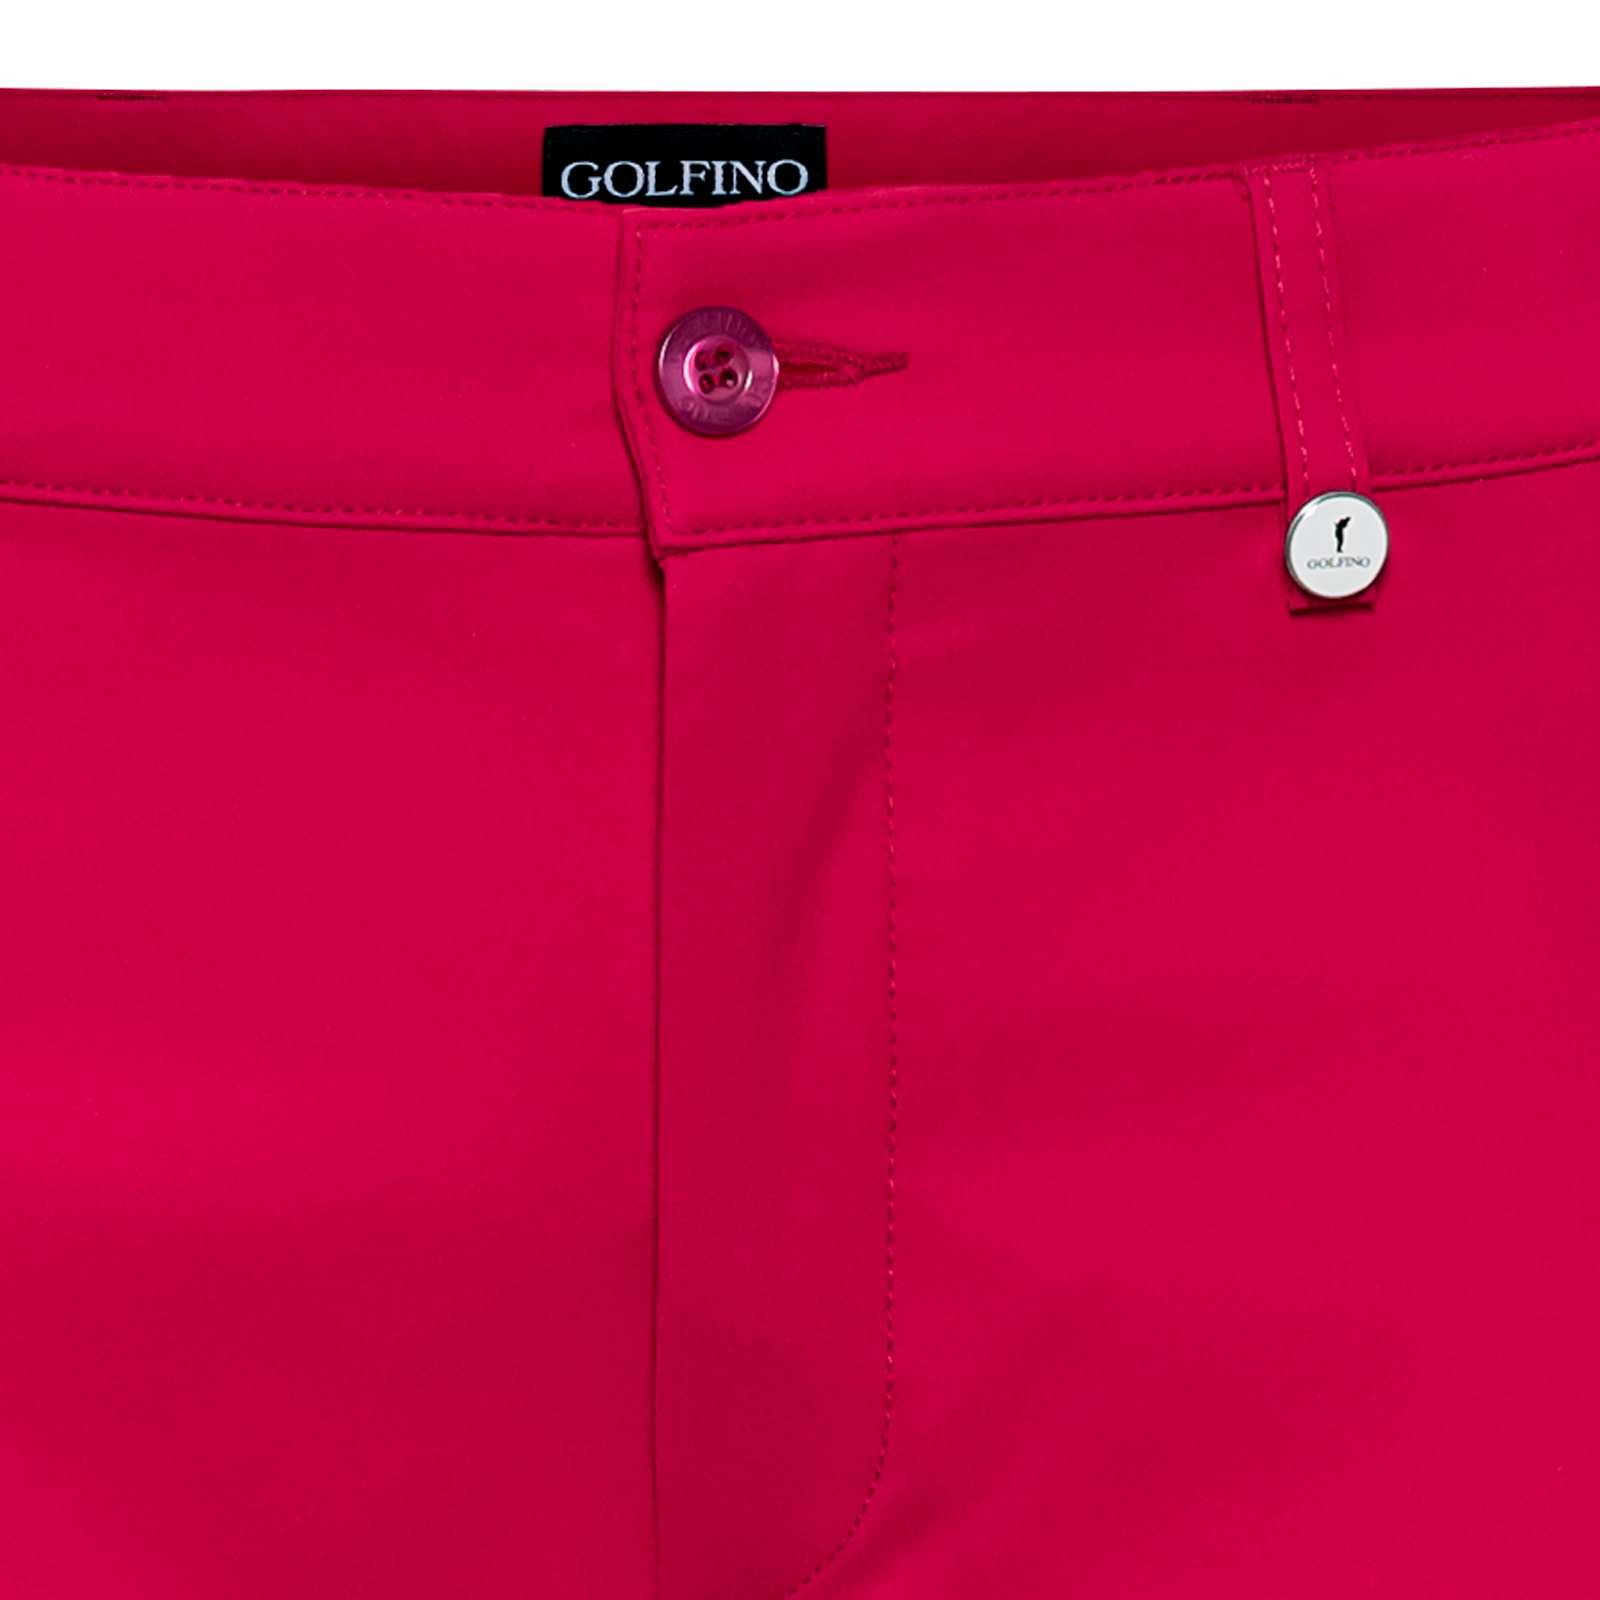 Ladies' stretch 7/8-length trousers